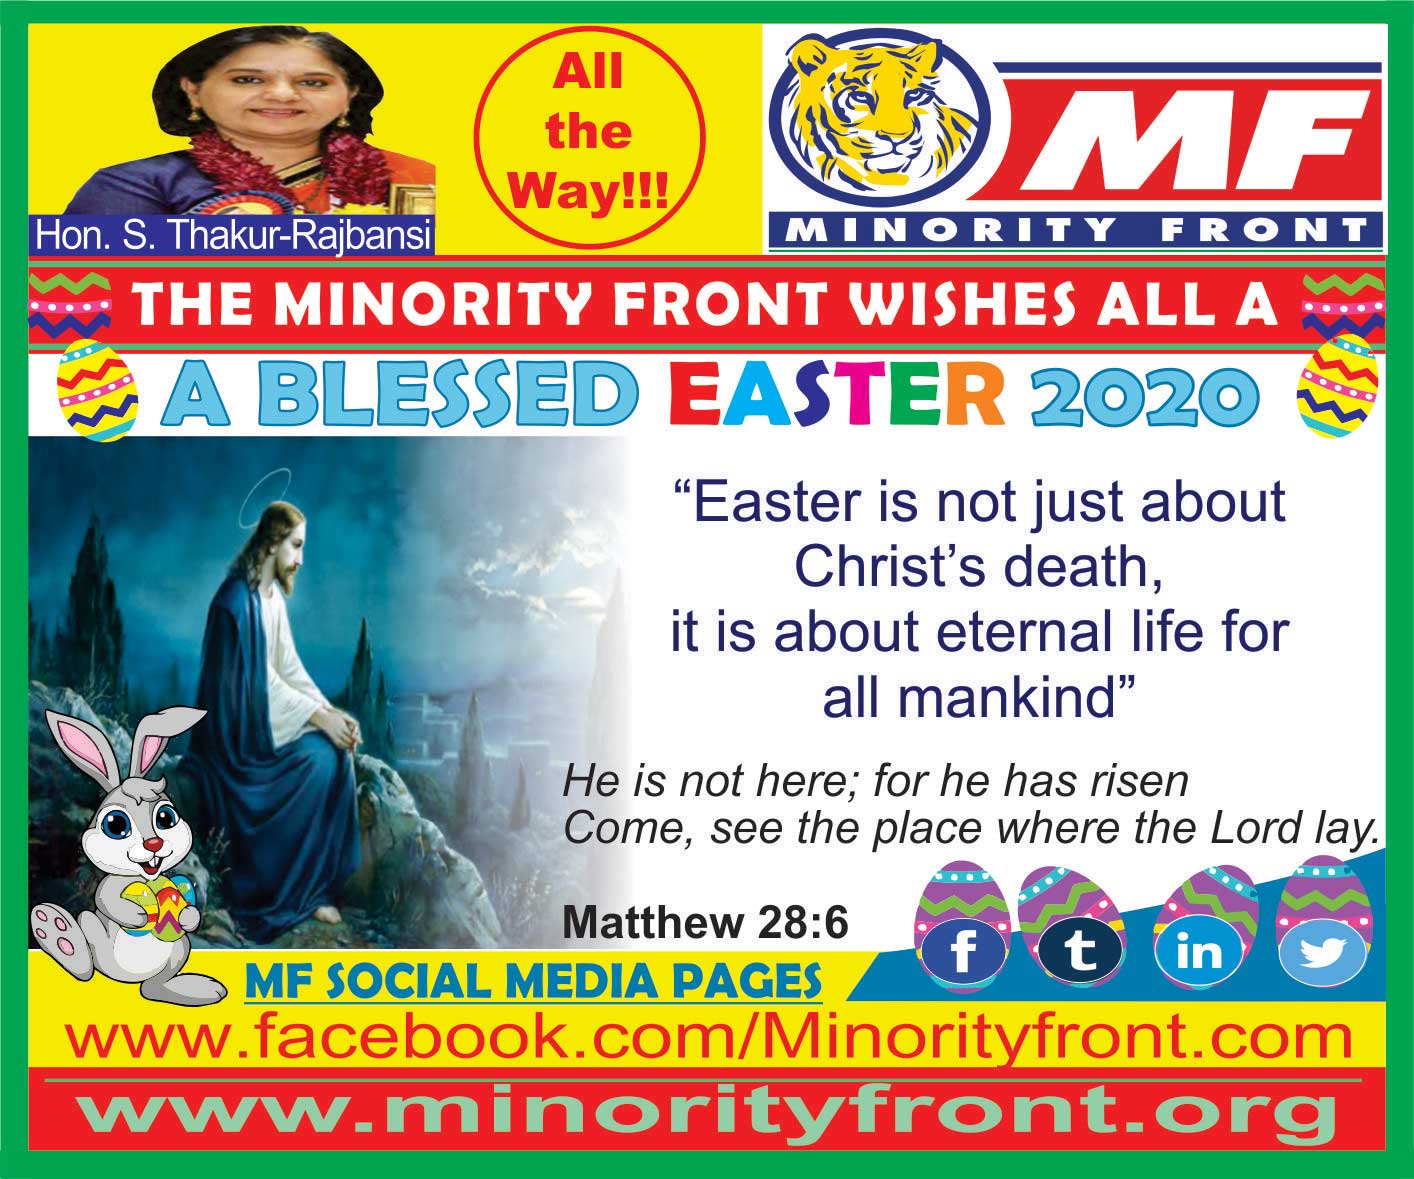 Happy Easter 2020